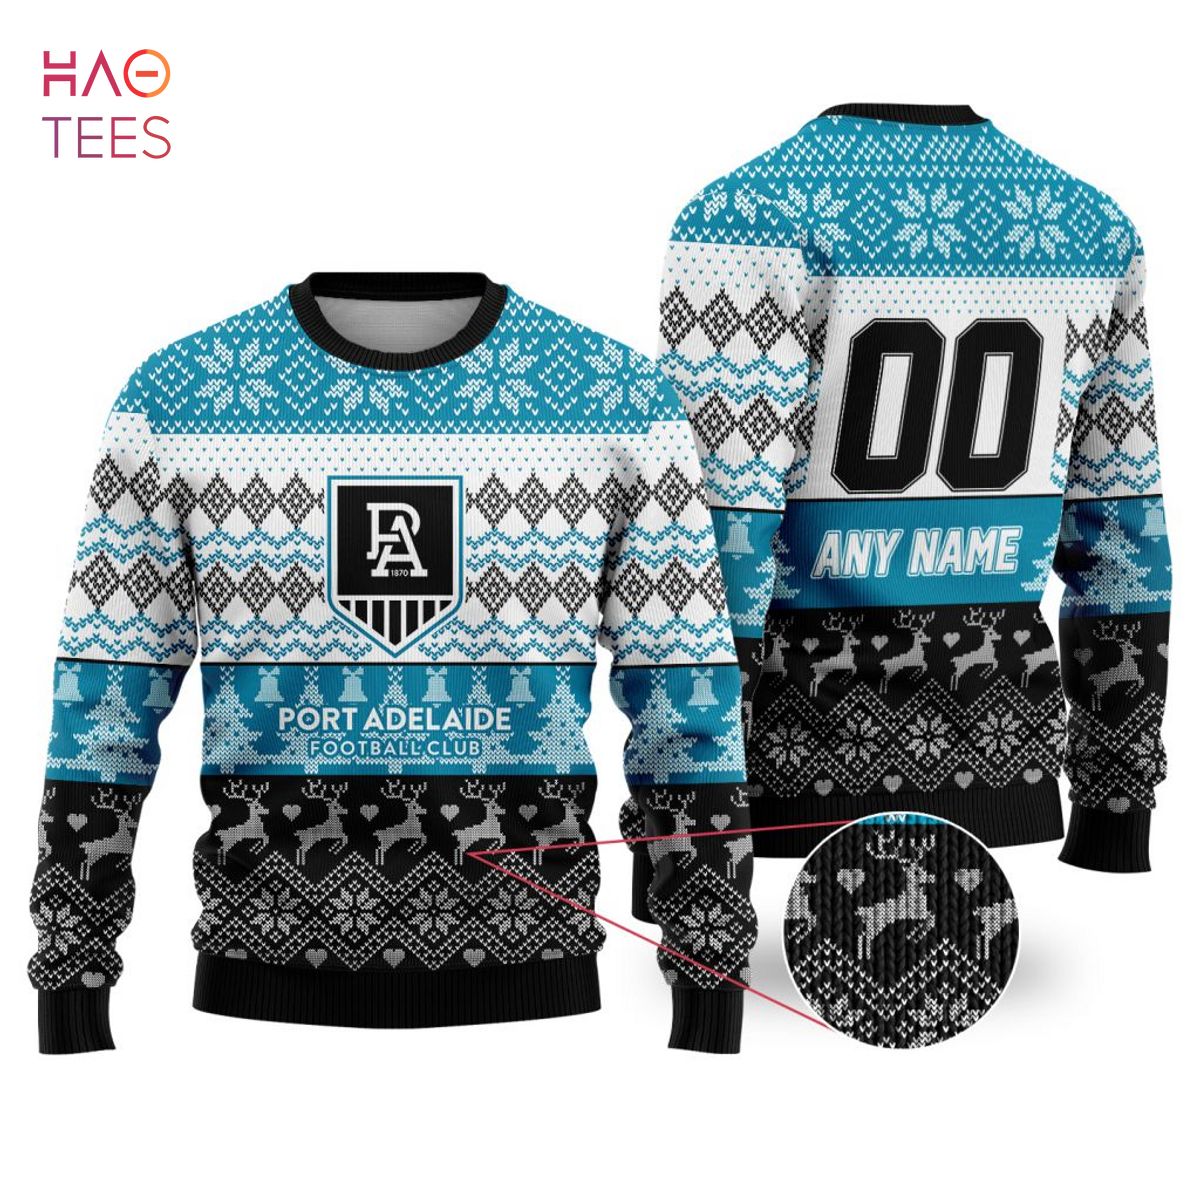 AFL Port Adelaide Football Club Special Ugly Christmas Sweater